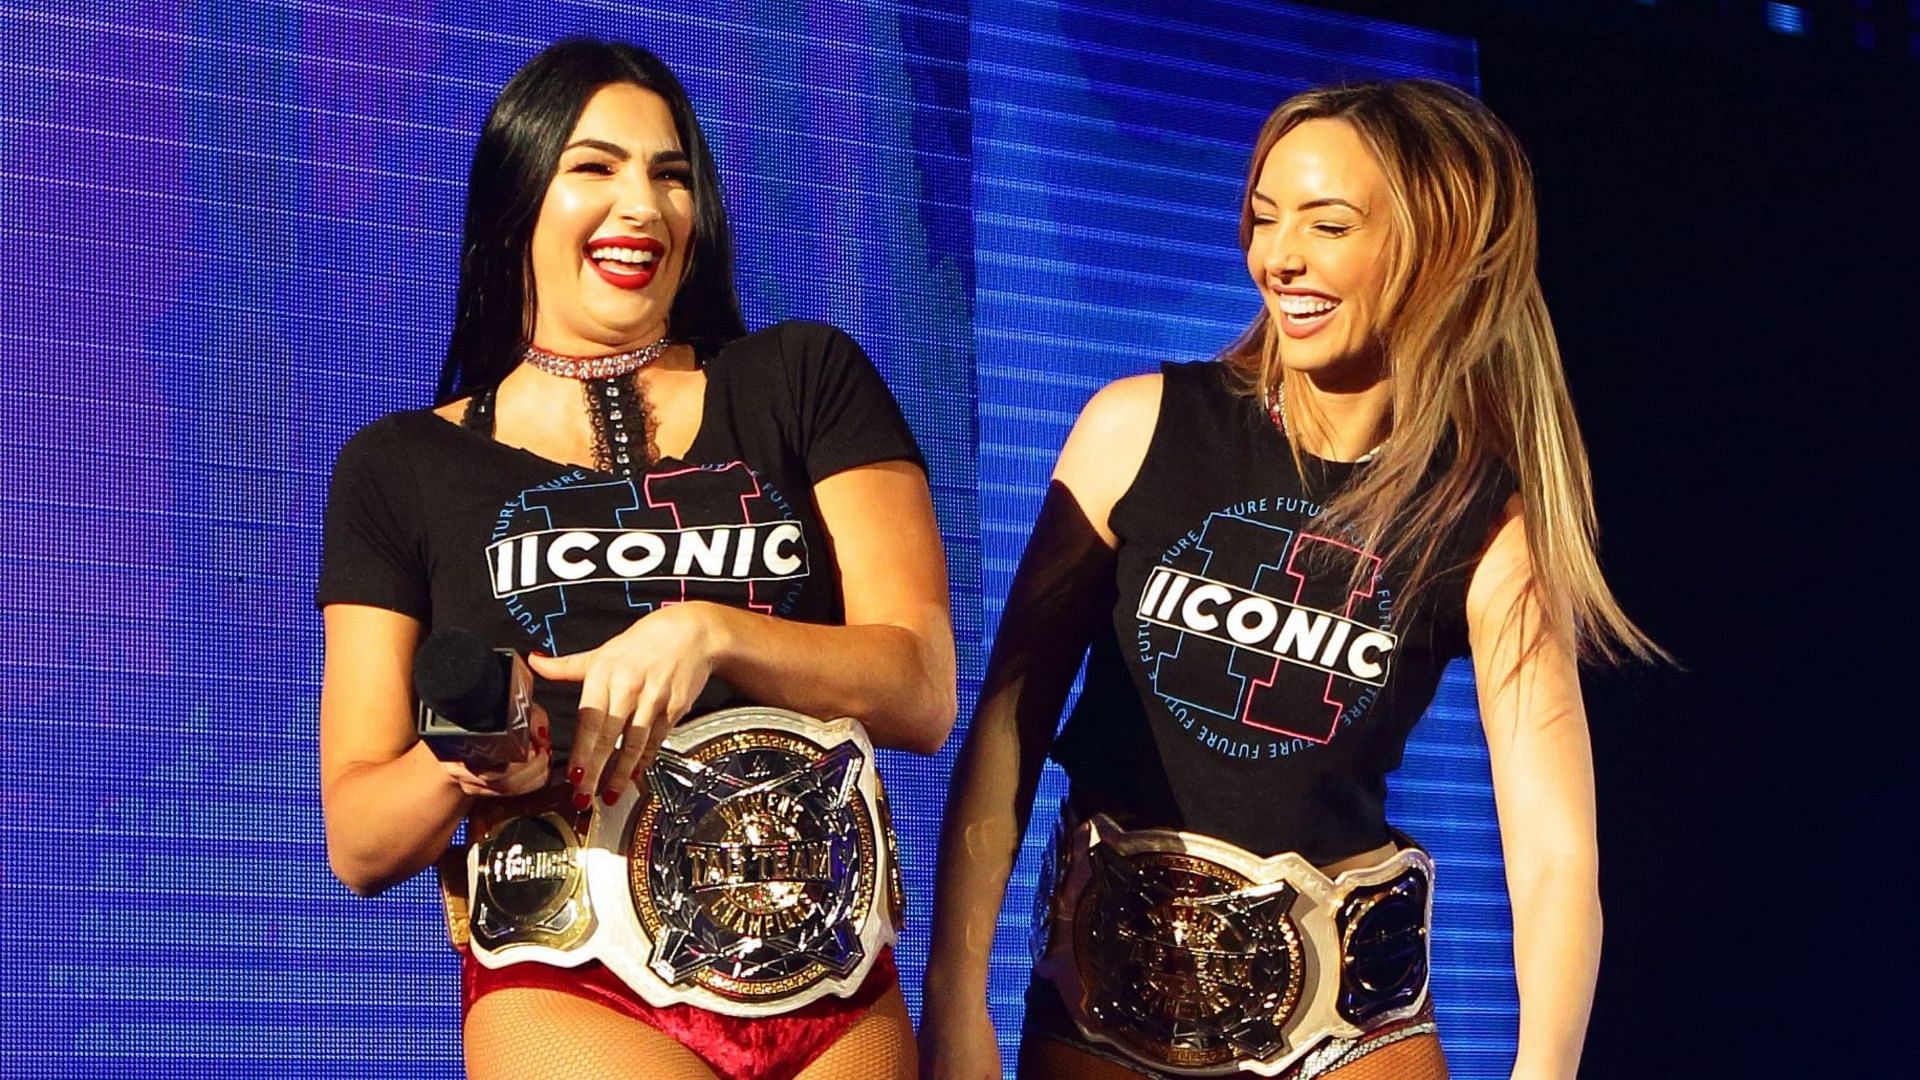 The IIconics got released from WWE in April 2021